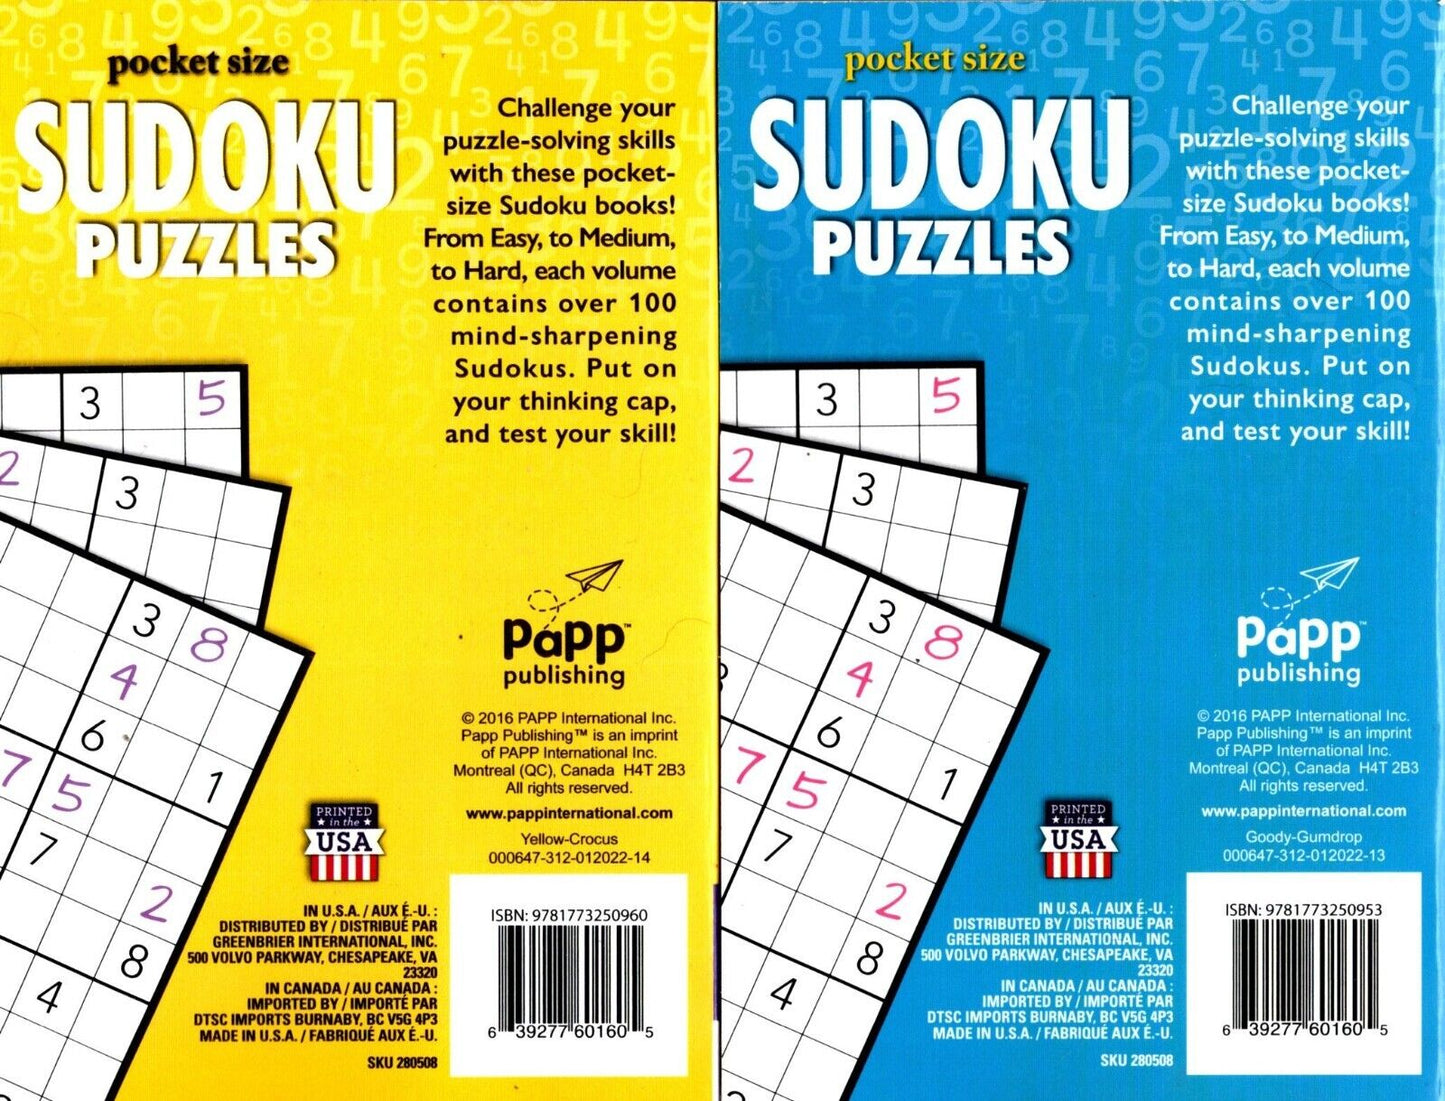 Pocket Size Sudoku Puzzles - Over 100 Challenging Puzzles - Vol.13 - 14